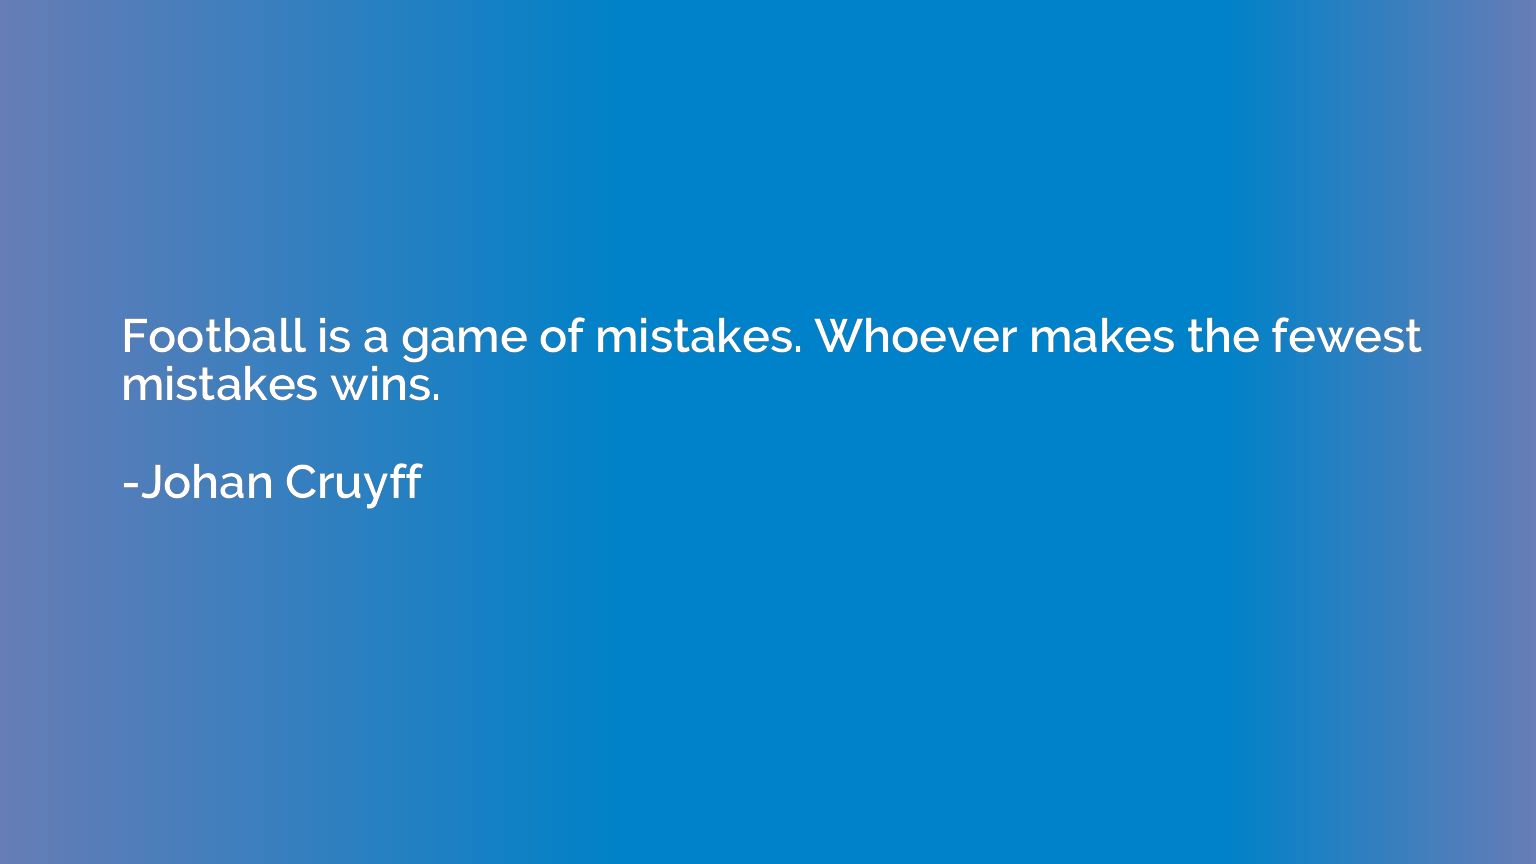 Football is a game of mistakes. Whoever makes the fewest mis